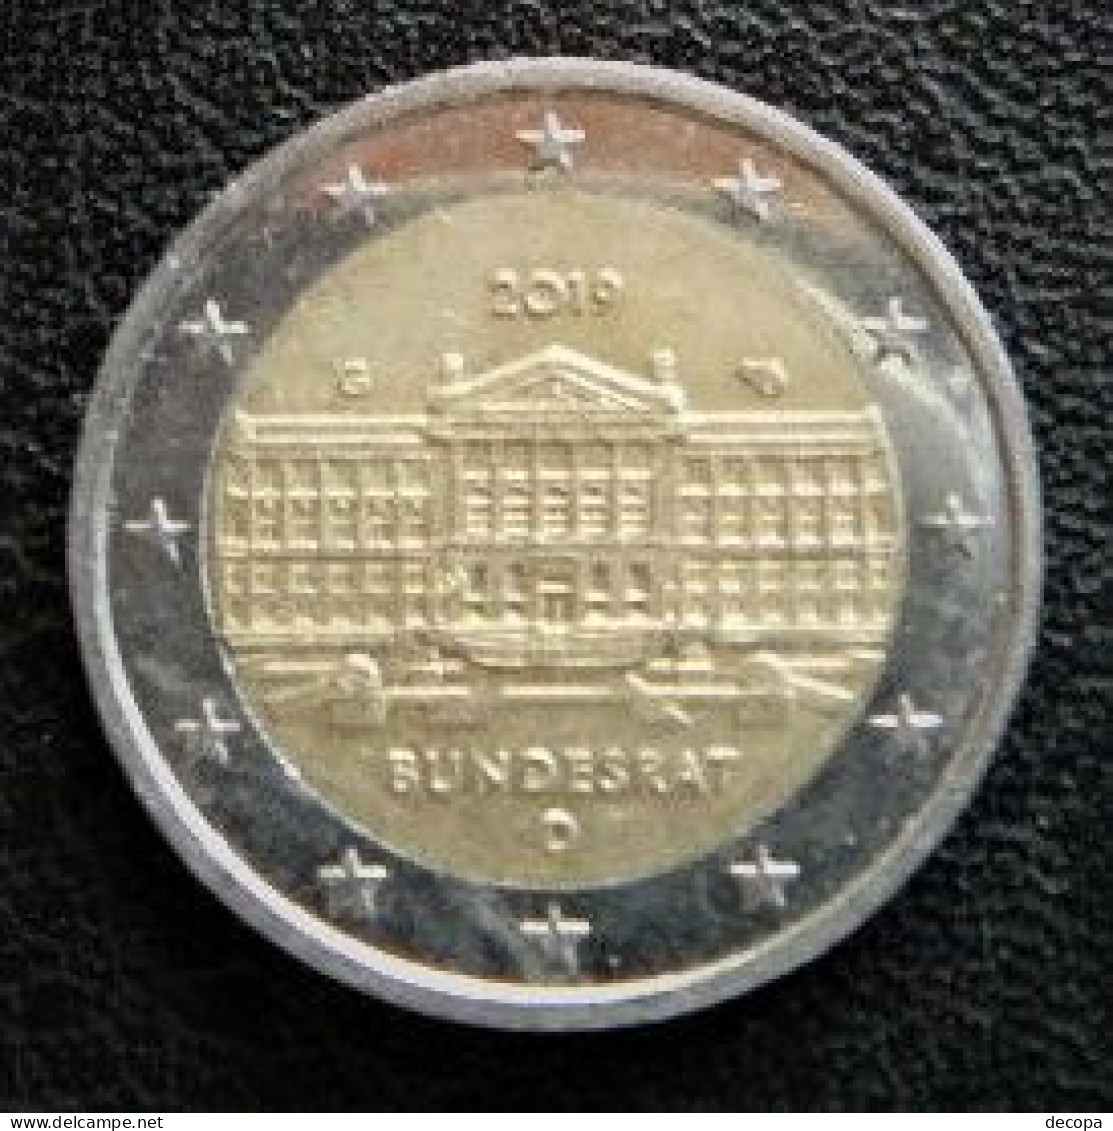 Germany - Allemagne - Duitsland   2 EURO 2019 G     Speciale Uitgave - Commemorative - Germania